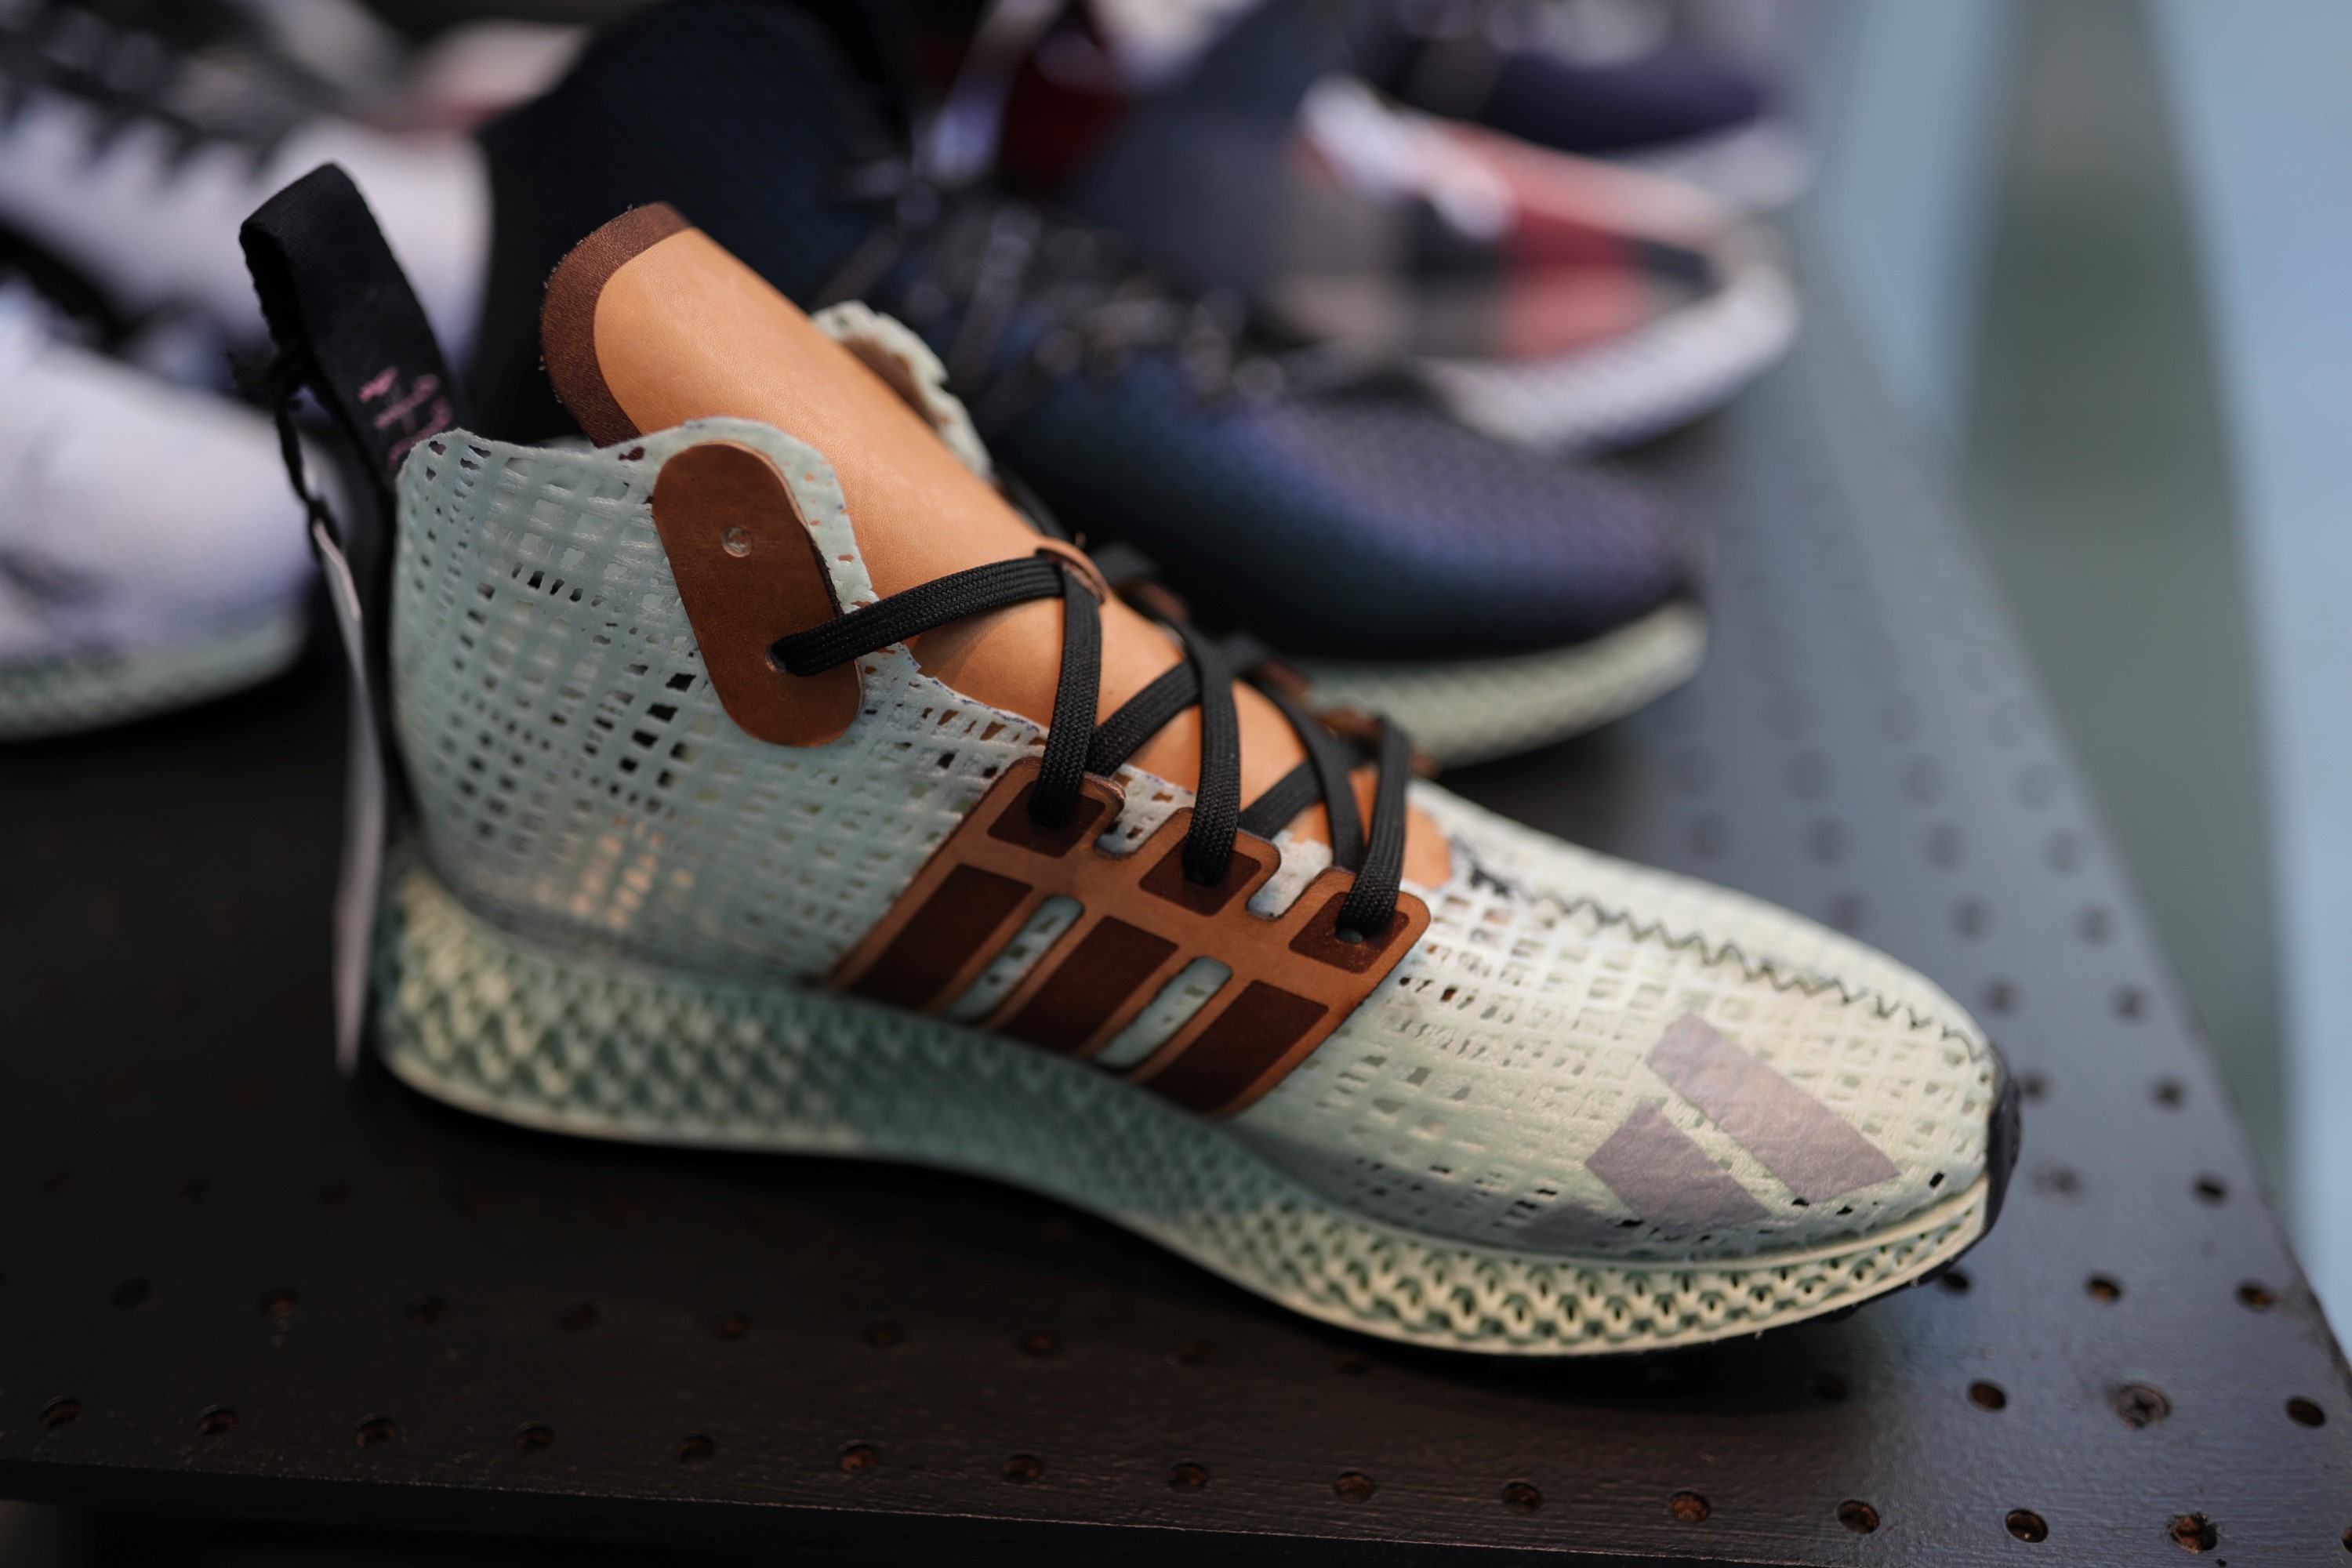 Adidas Plans On Only Using Recycled Plastics By 2024 - CBS Philadelphia